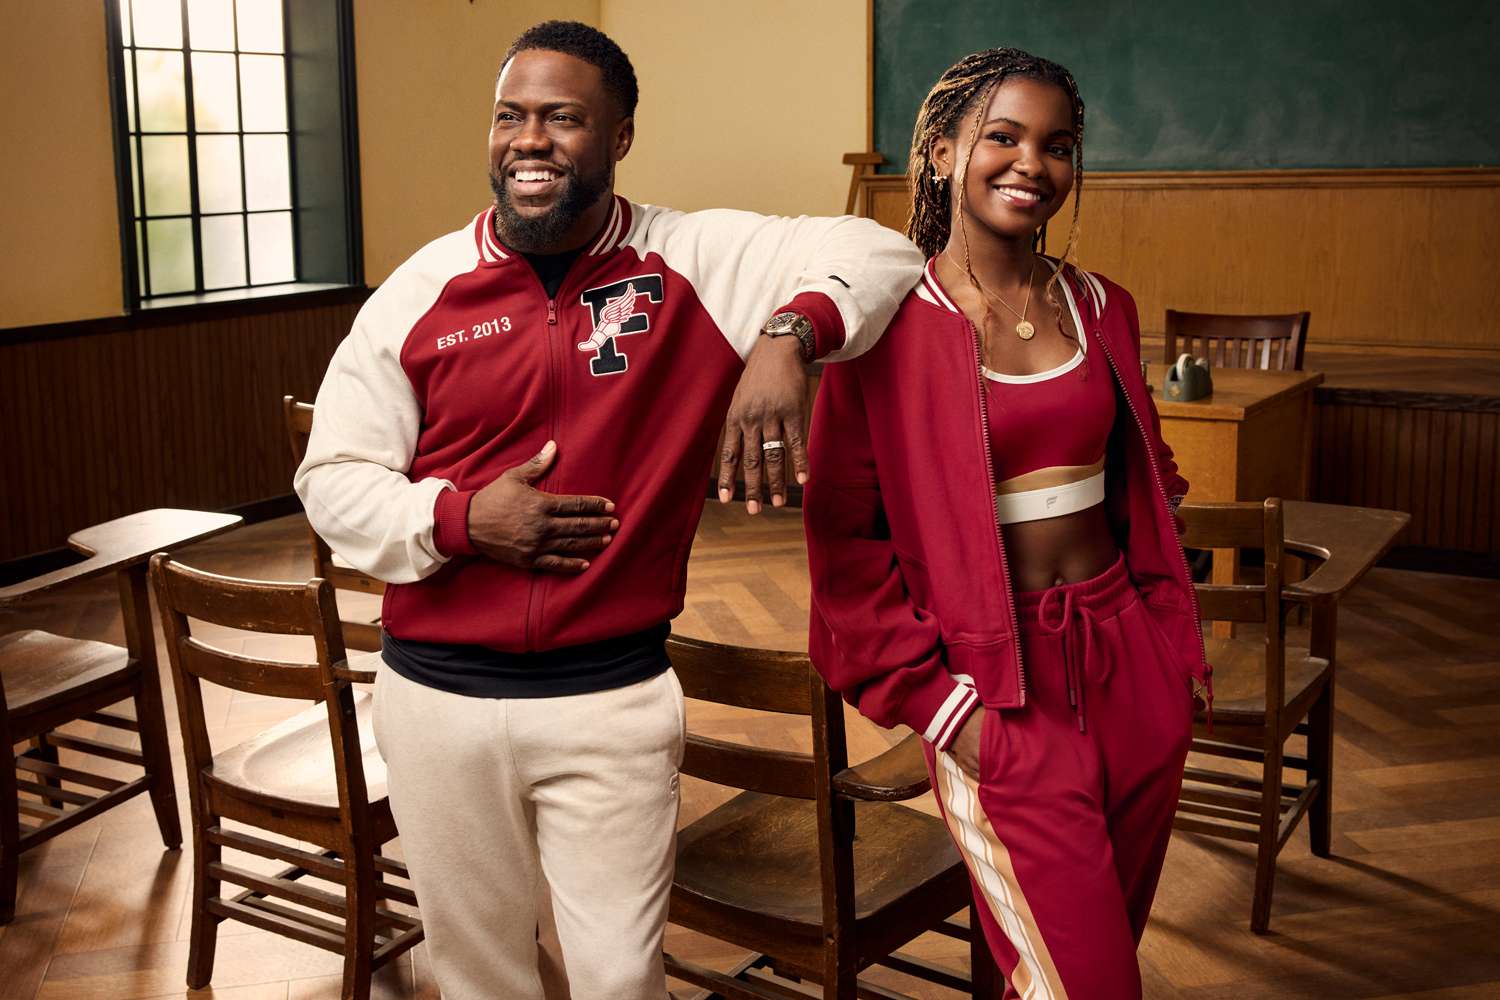 Comedian and actor Kevin Hart teams up with his daughter, Heaven, on a new retro-inspired collegiate collection with Fabletics.